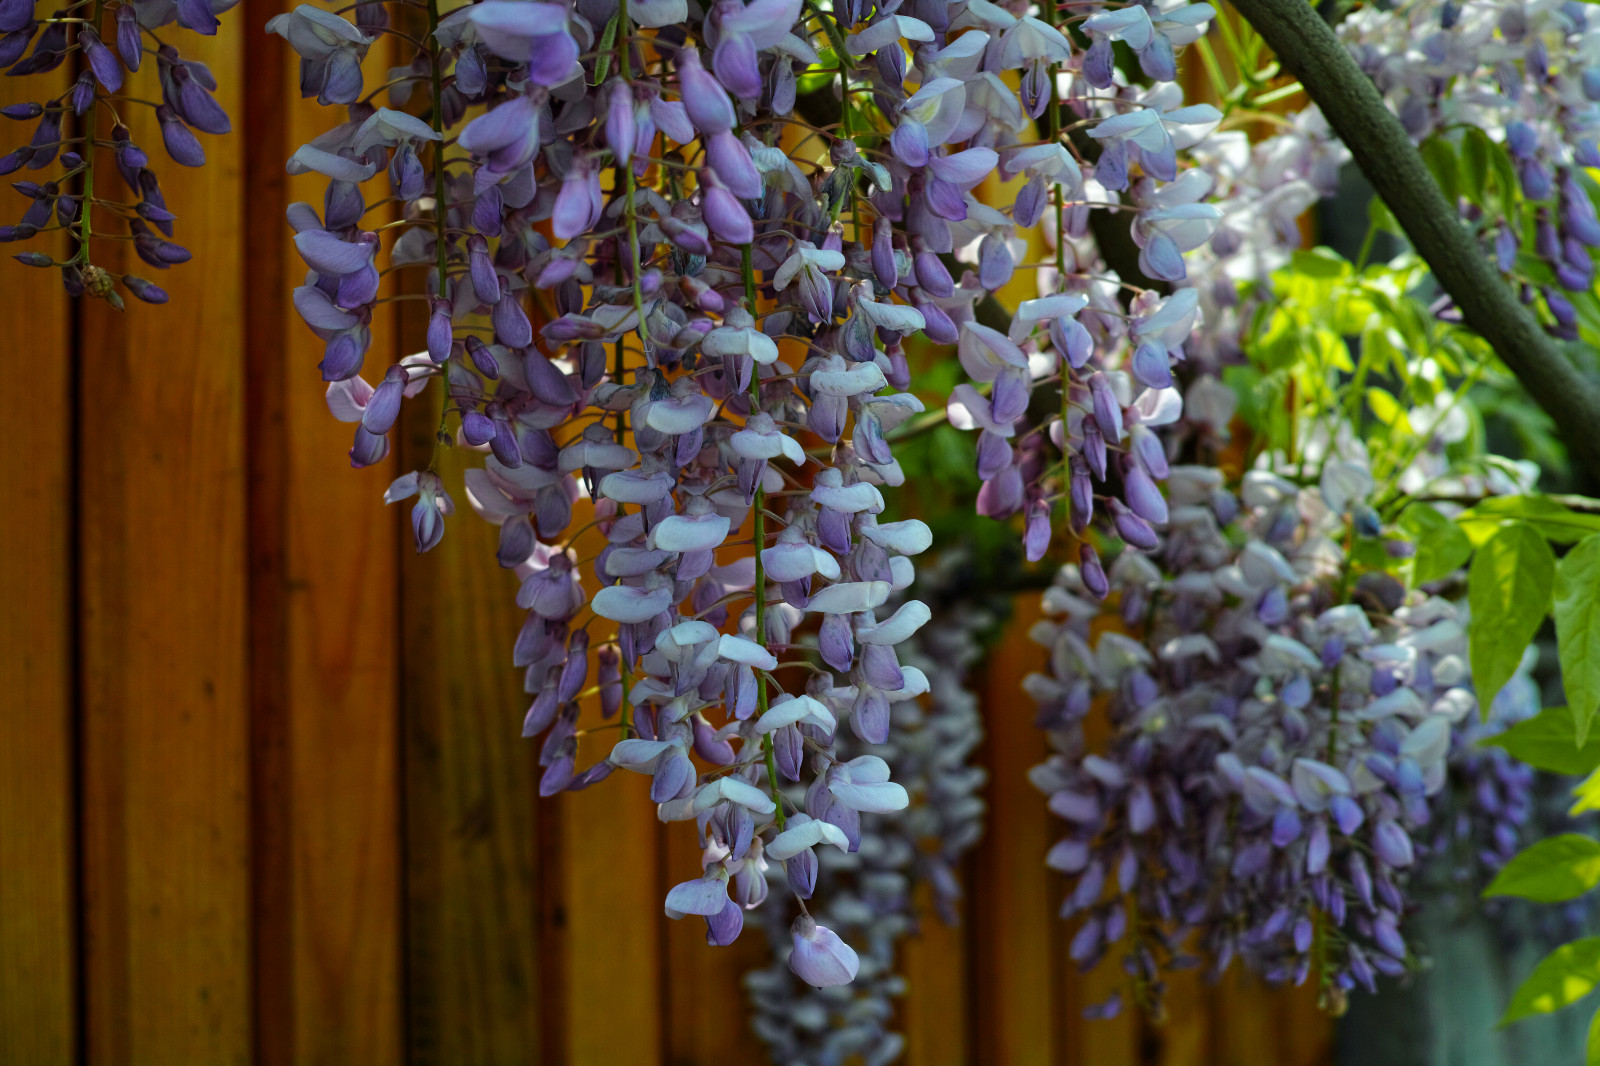 A tree with purple flowers hanging from it - Plants